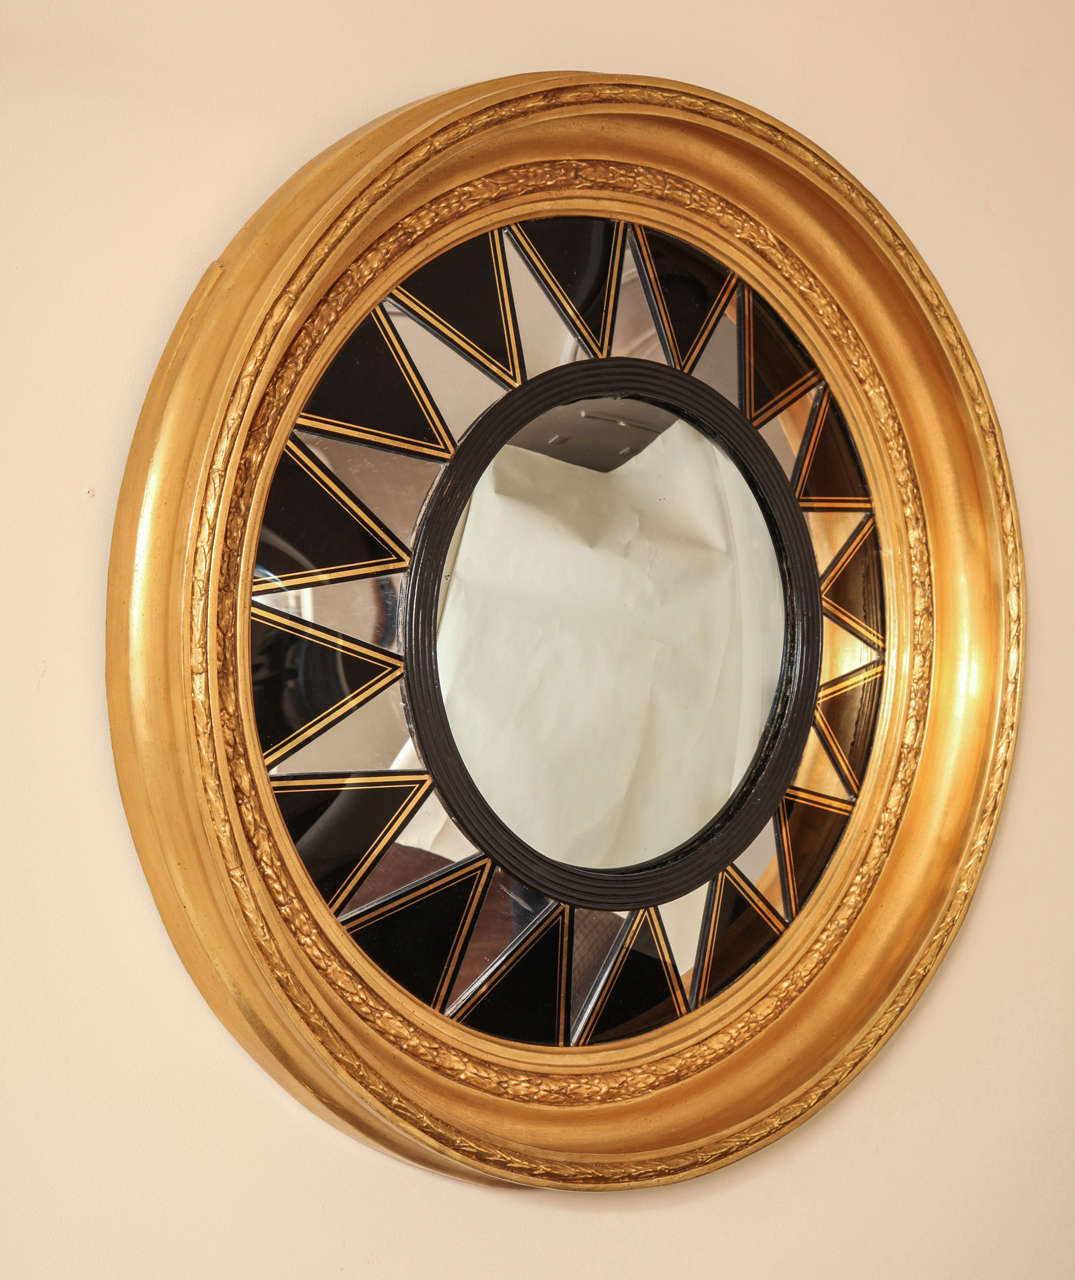 An English Regency period convex mirror, the round center glass framed by ebonized reeded molding surrounded by triangular black plexi elements radiating from center and having gilt stripe details. The outer frame with carved wood and gesso leaf tip